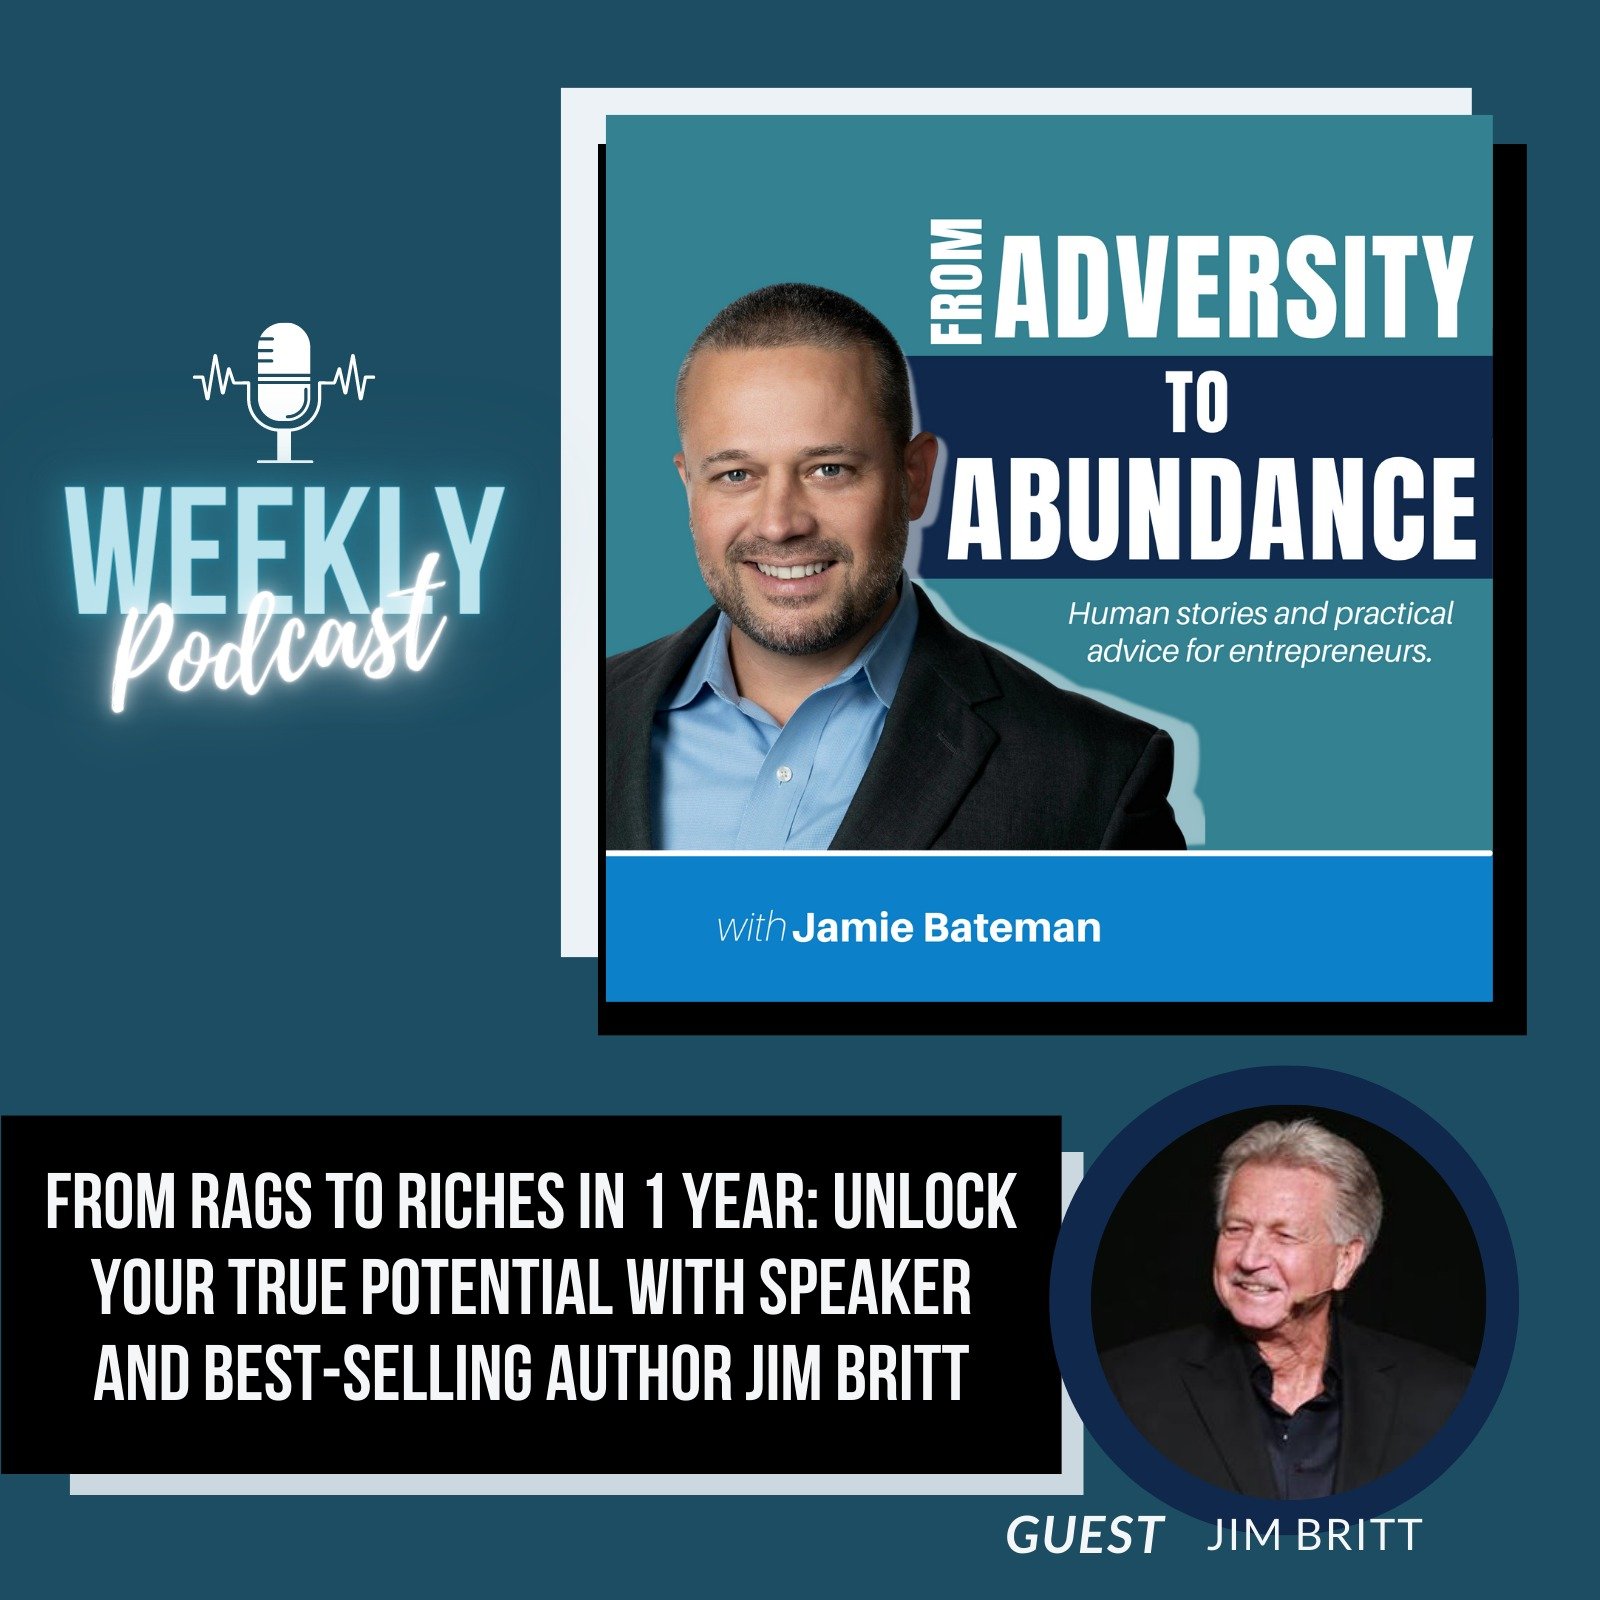 From Rags to Riches in 1 Year: Unlock Your True Potential with Speaker and Best-Selling Author Jim Britt